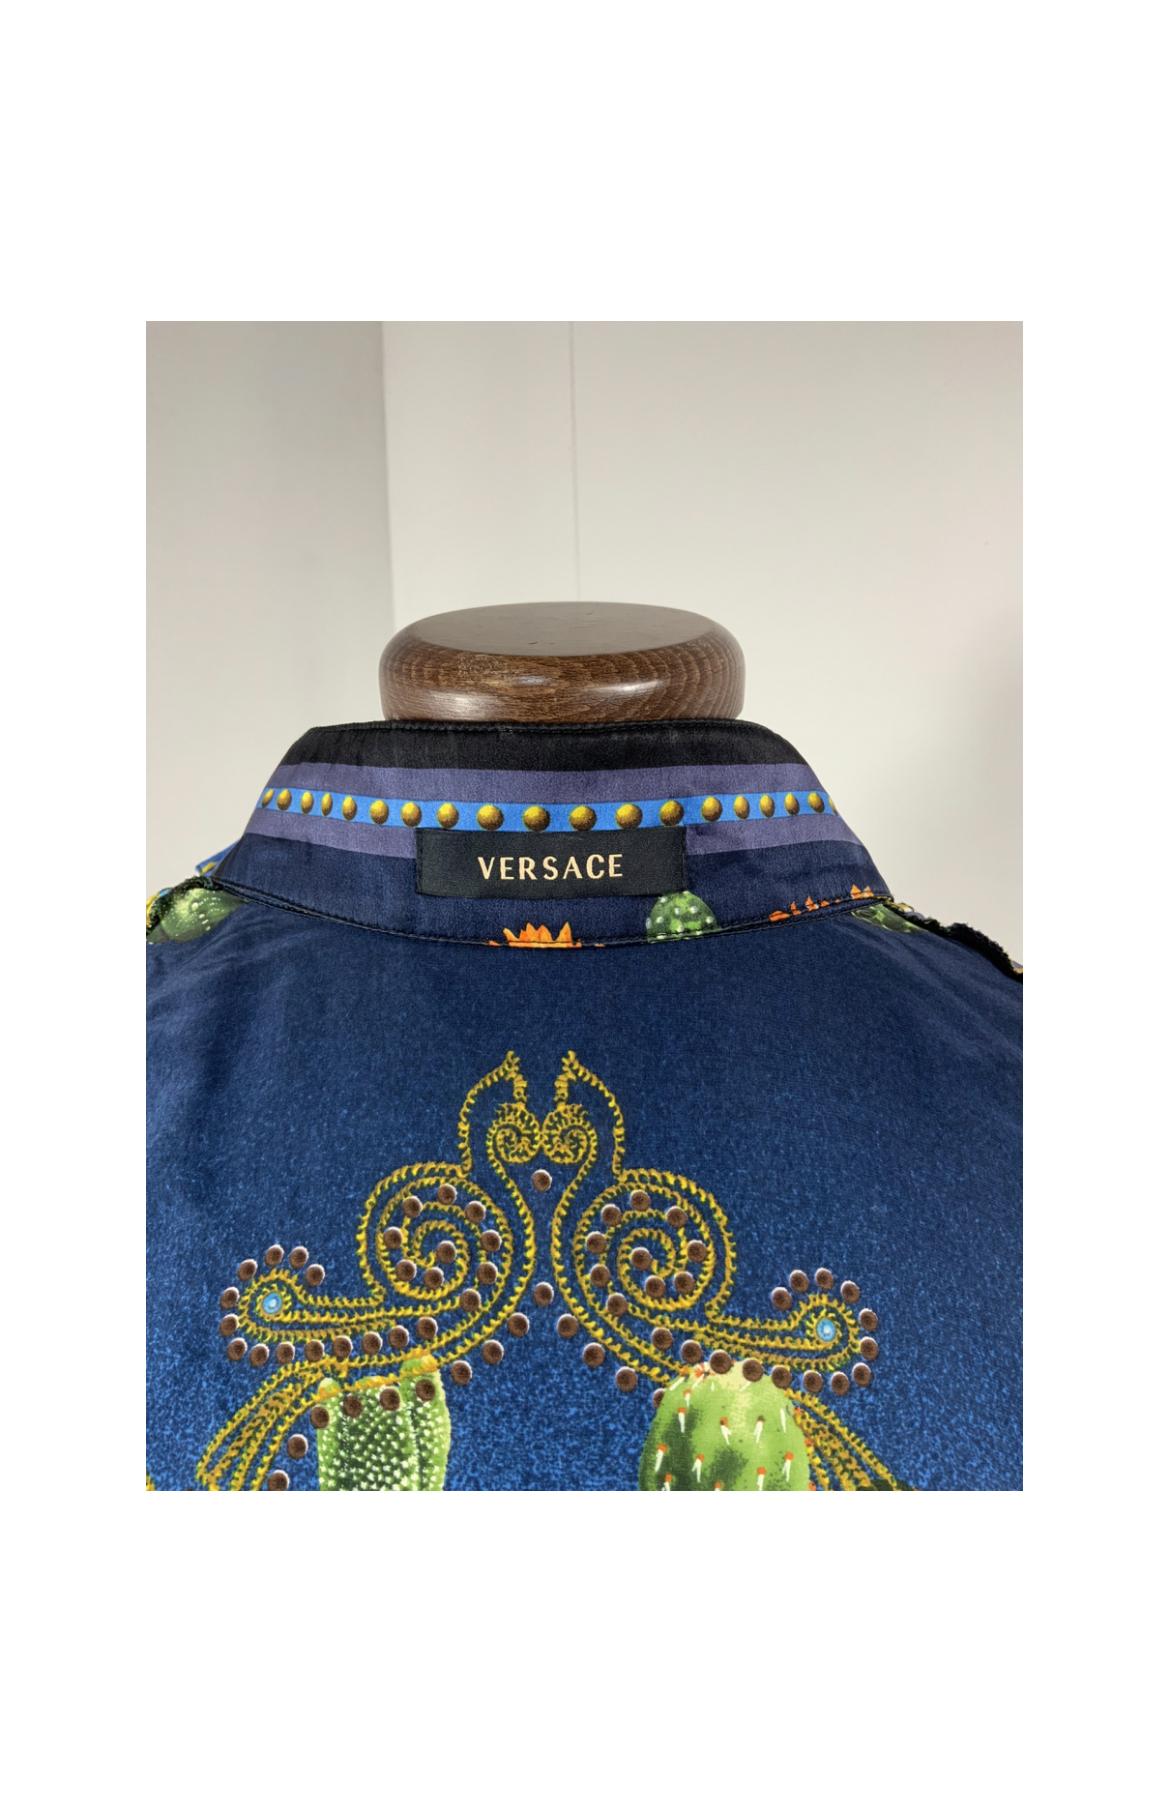 Versace shirt with cactus print. For Sale 1